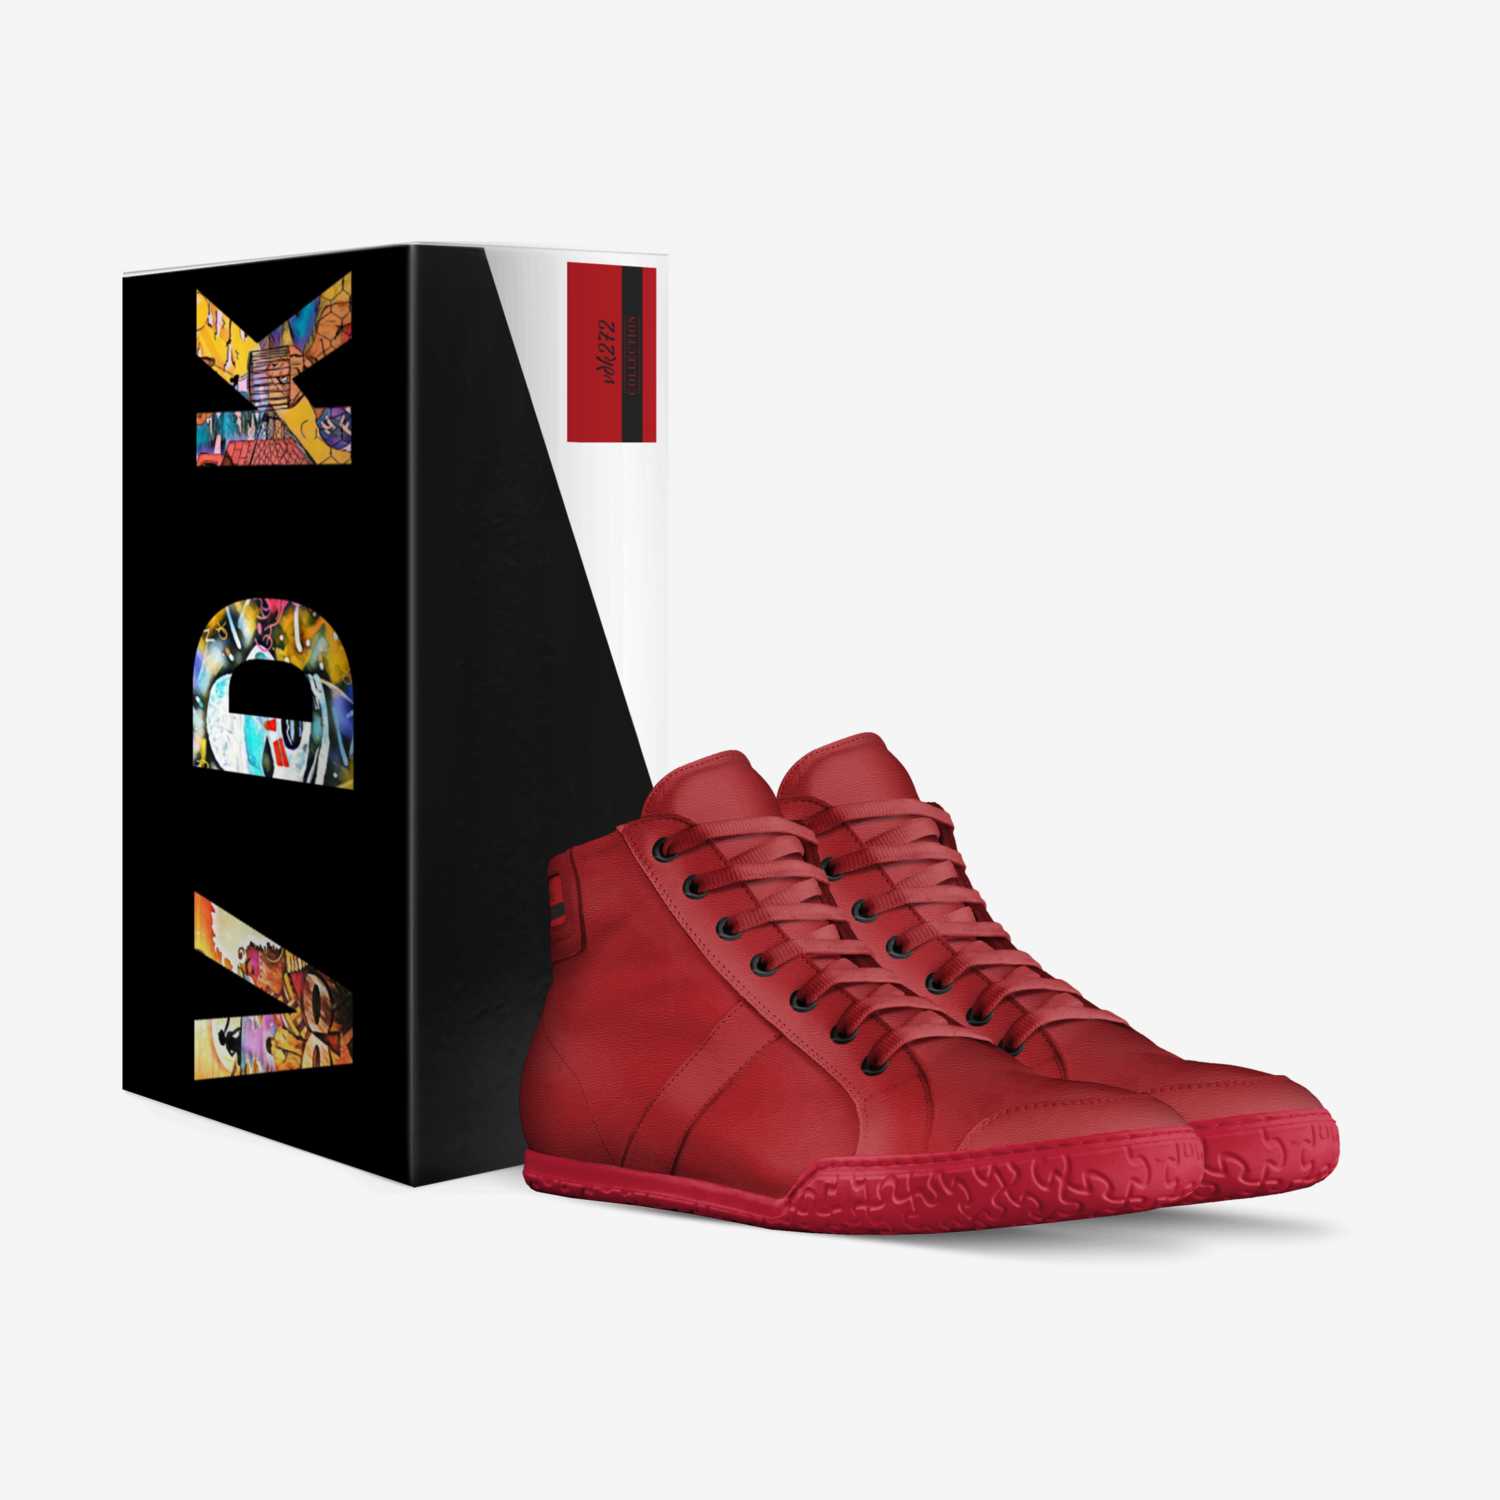 vdk272 custom made in Italy shoes by Cyron James | Box view